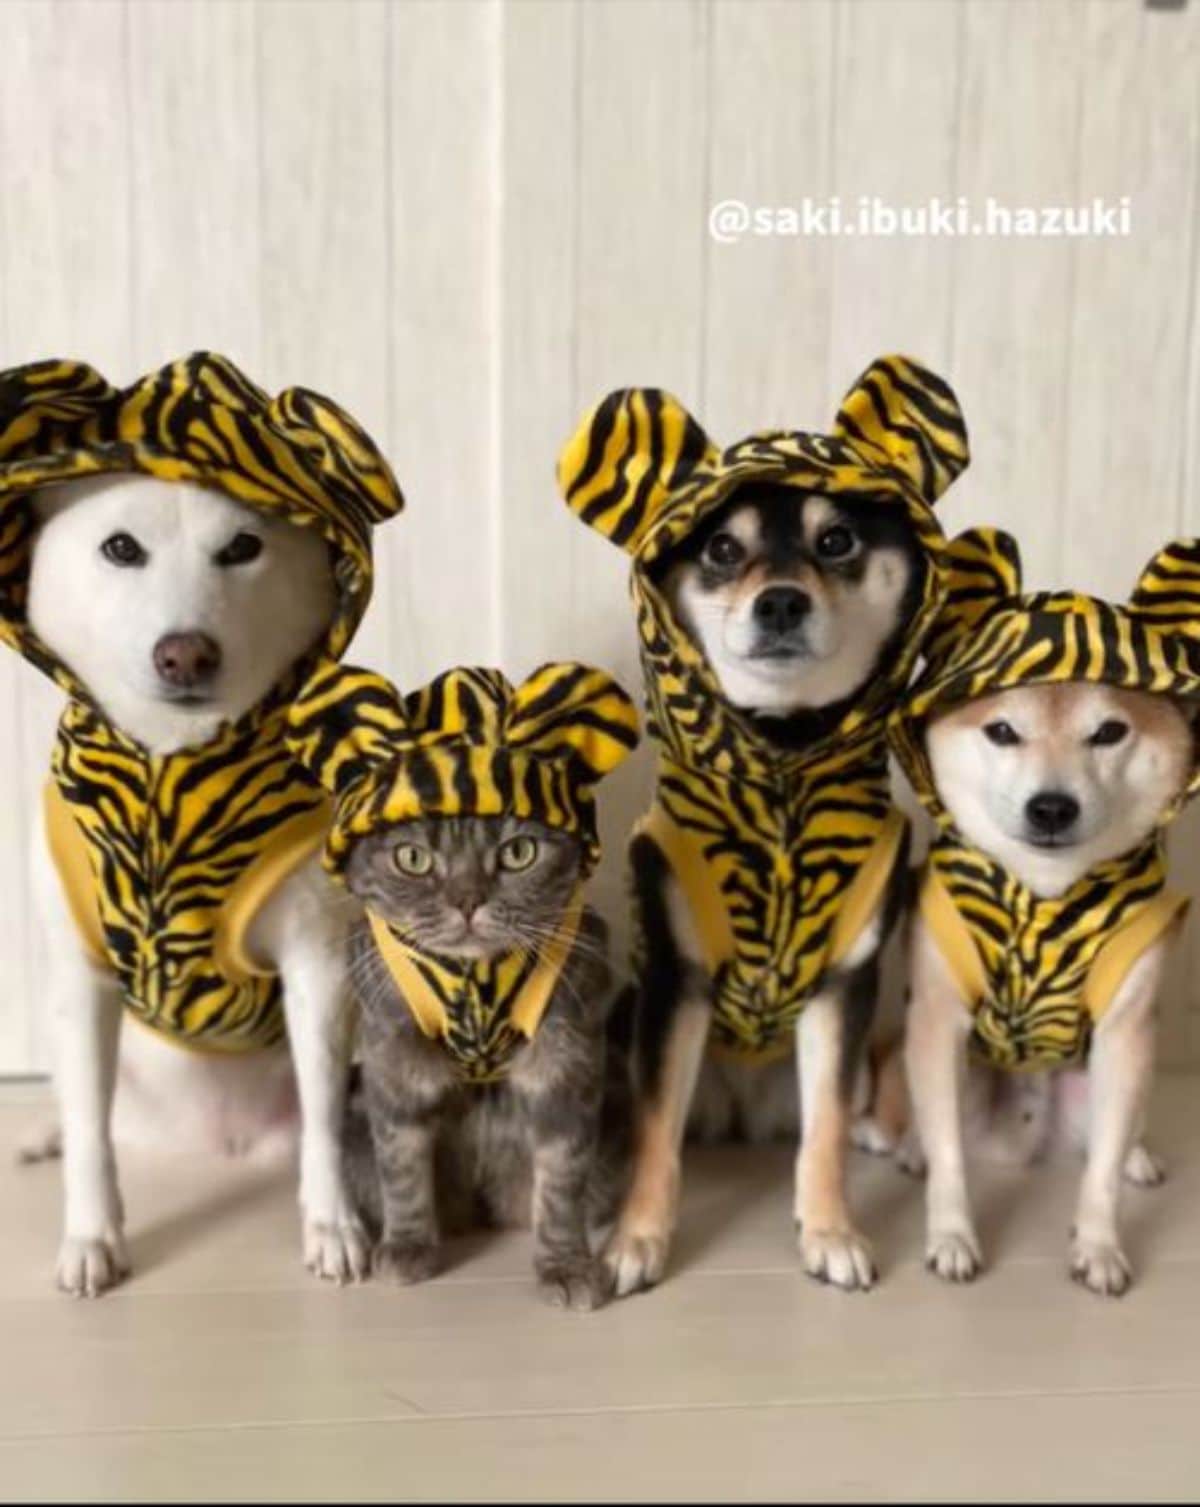 white shiba inu grey tabby black and brown shiba inus standing in a row wearing yellow and black striped outfits